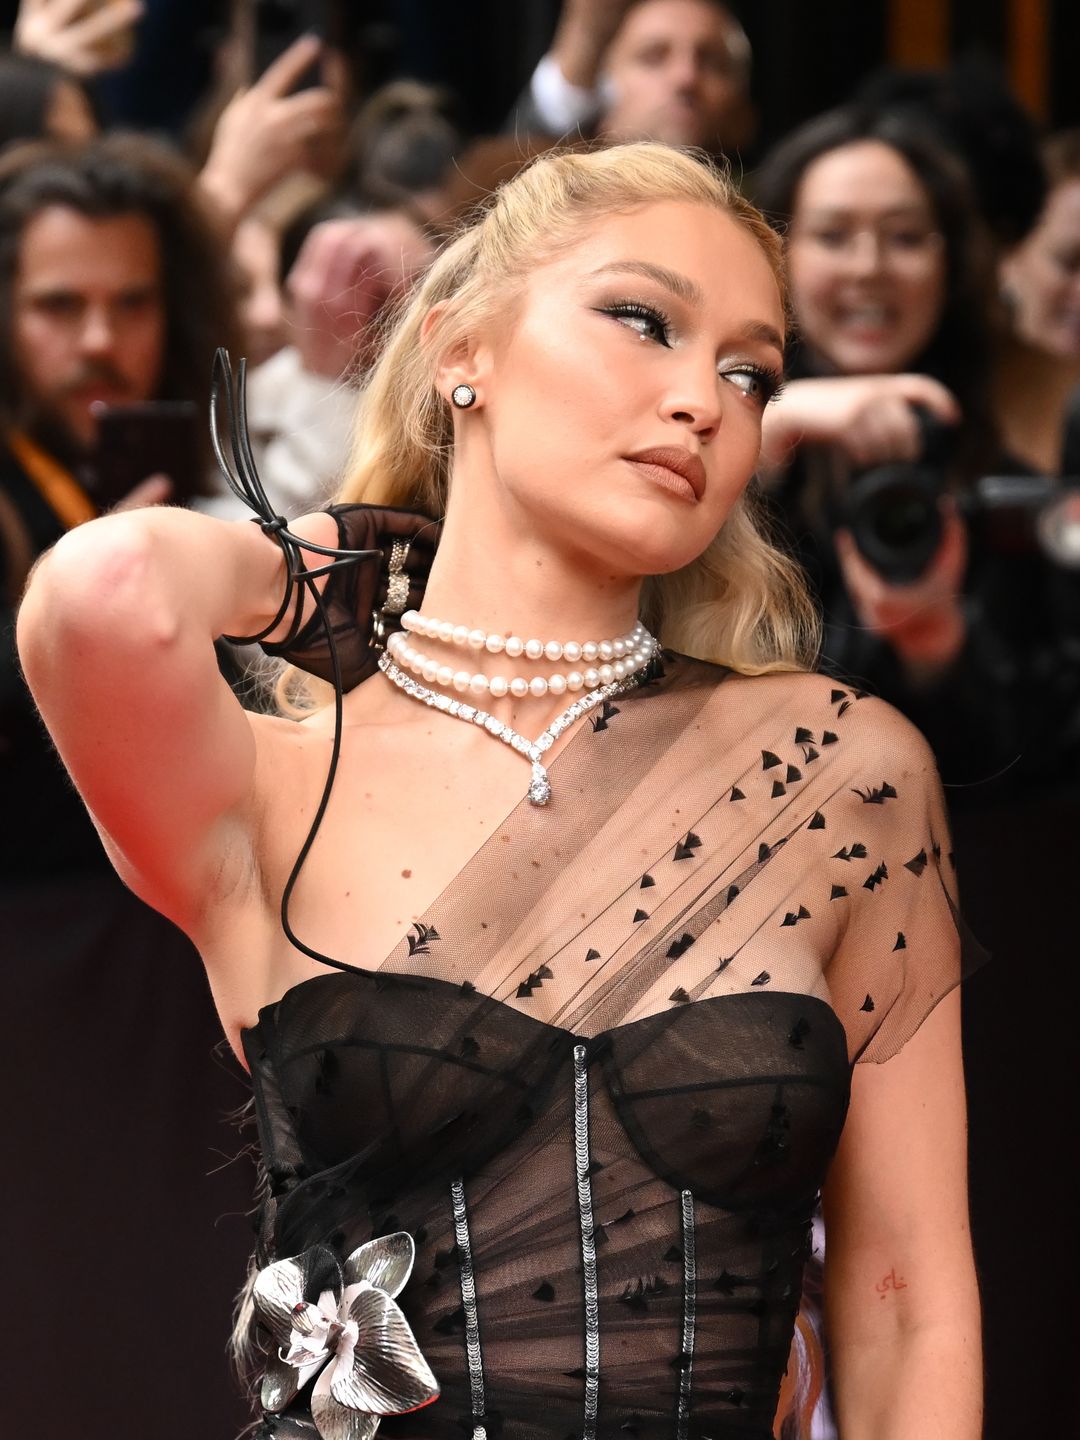 Gigi Hadid attends the Met Gala in a mesh corset dress from Givenchy